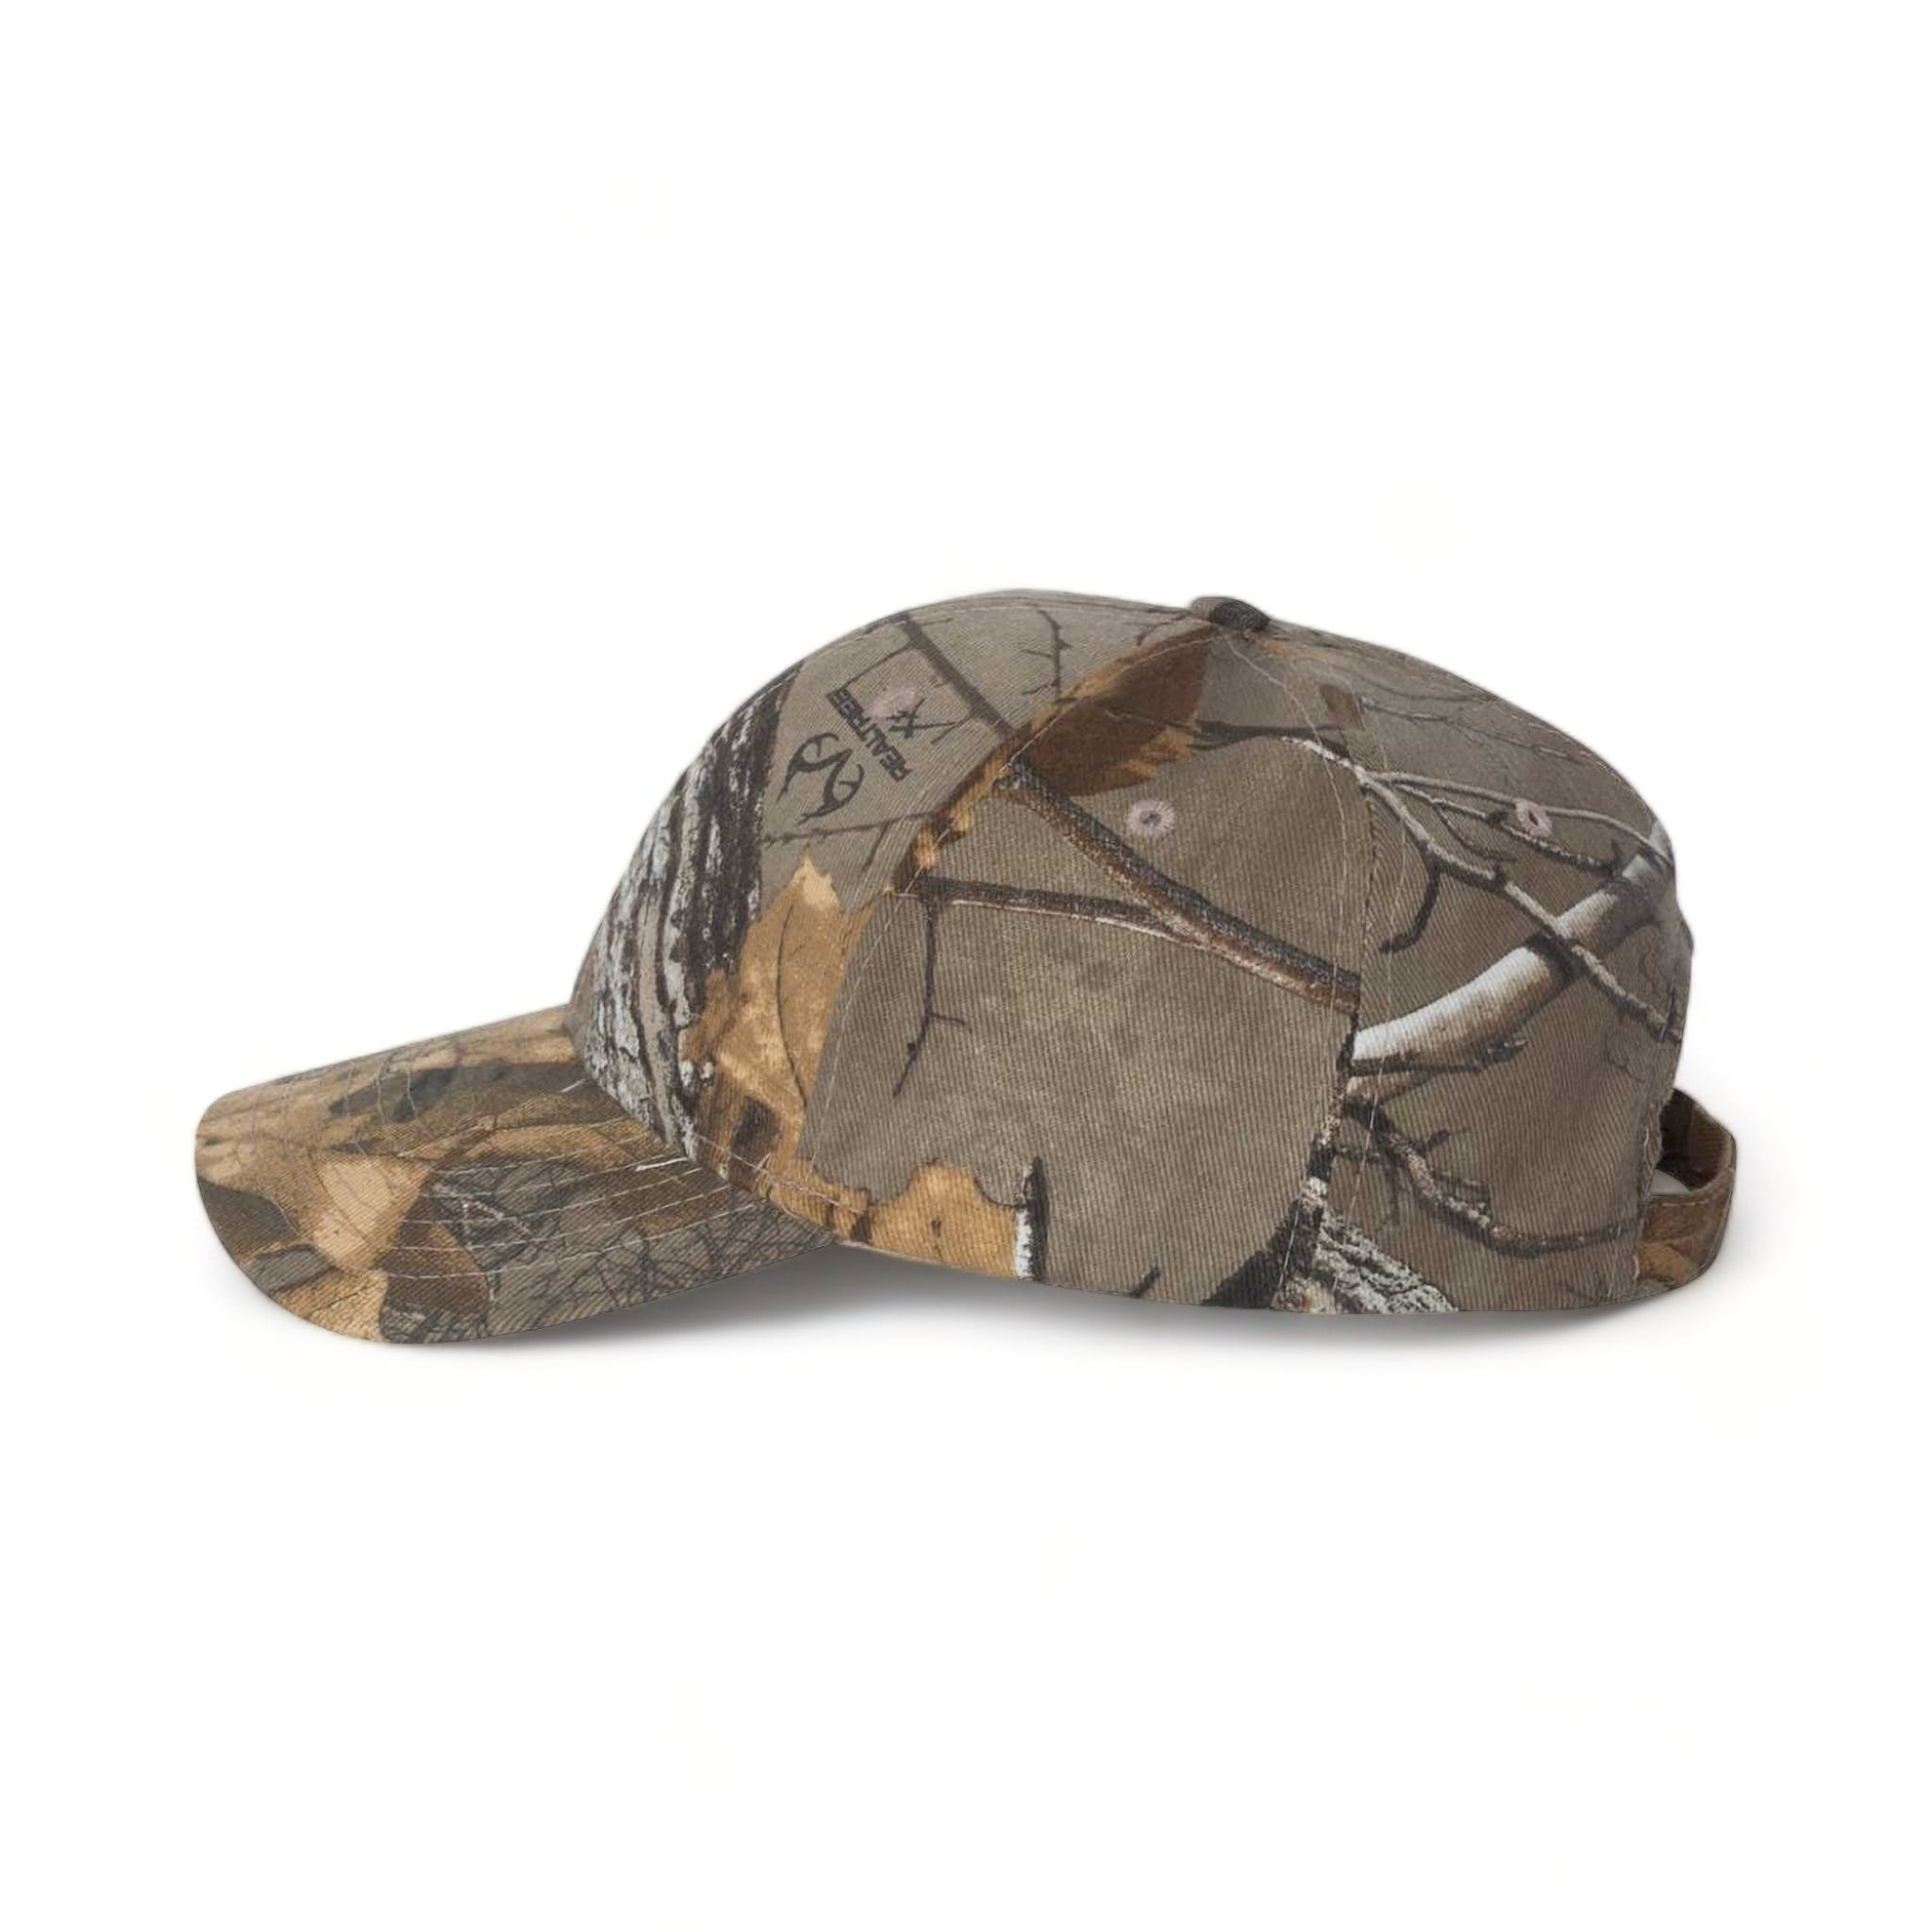 Side view of Kati LC10 custom hat in realtree xtra